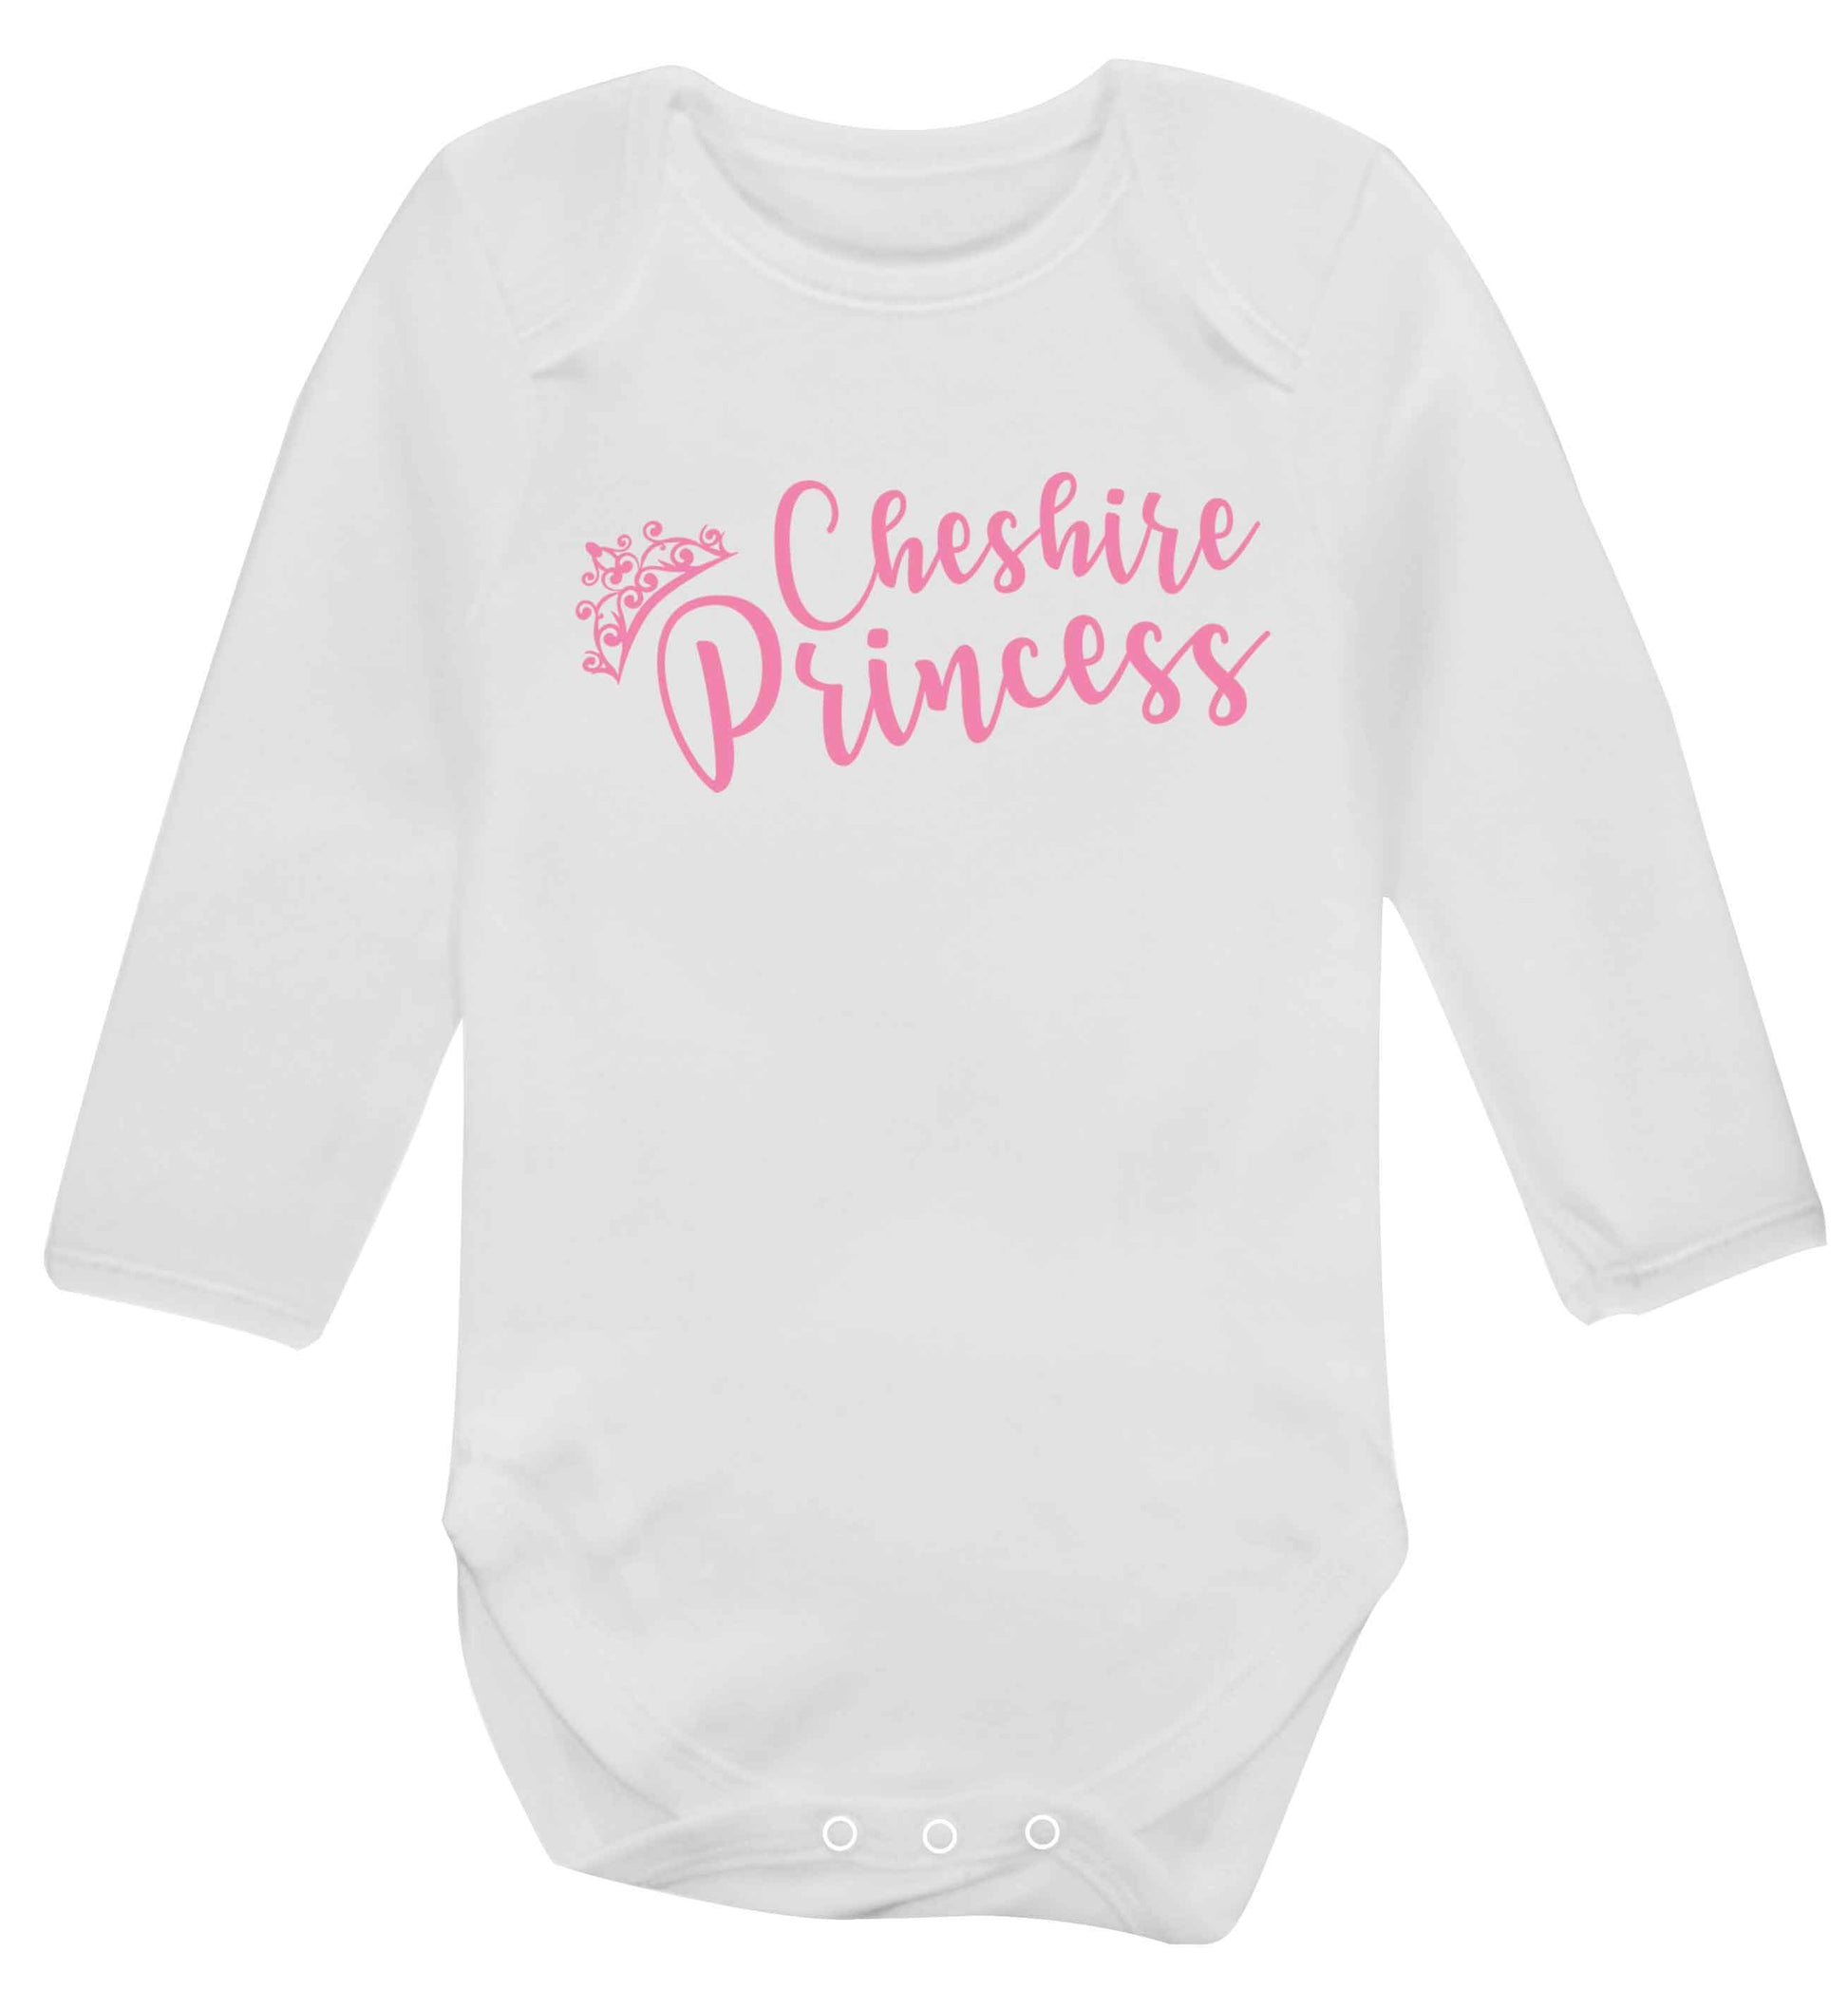 Cheshire princess Baby Vest long sleeved white 6-12 months